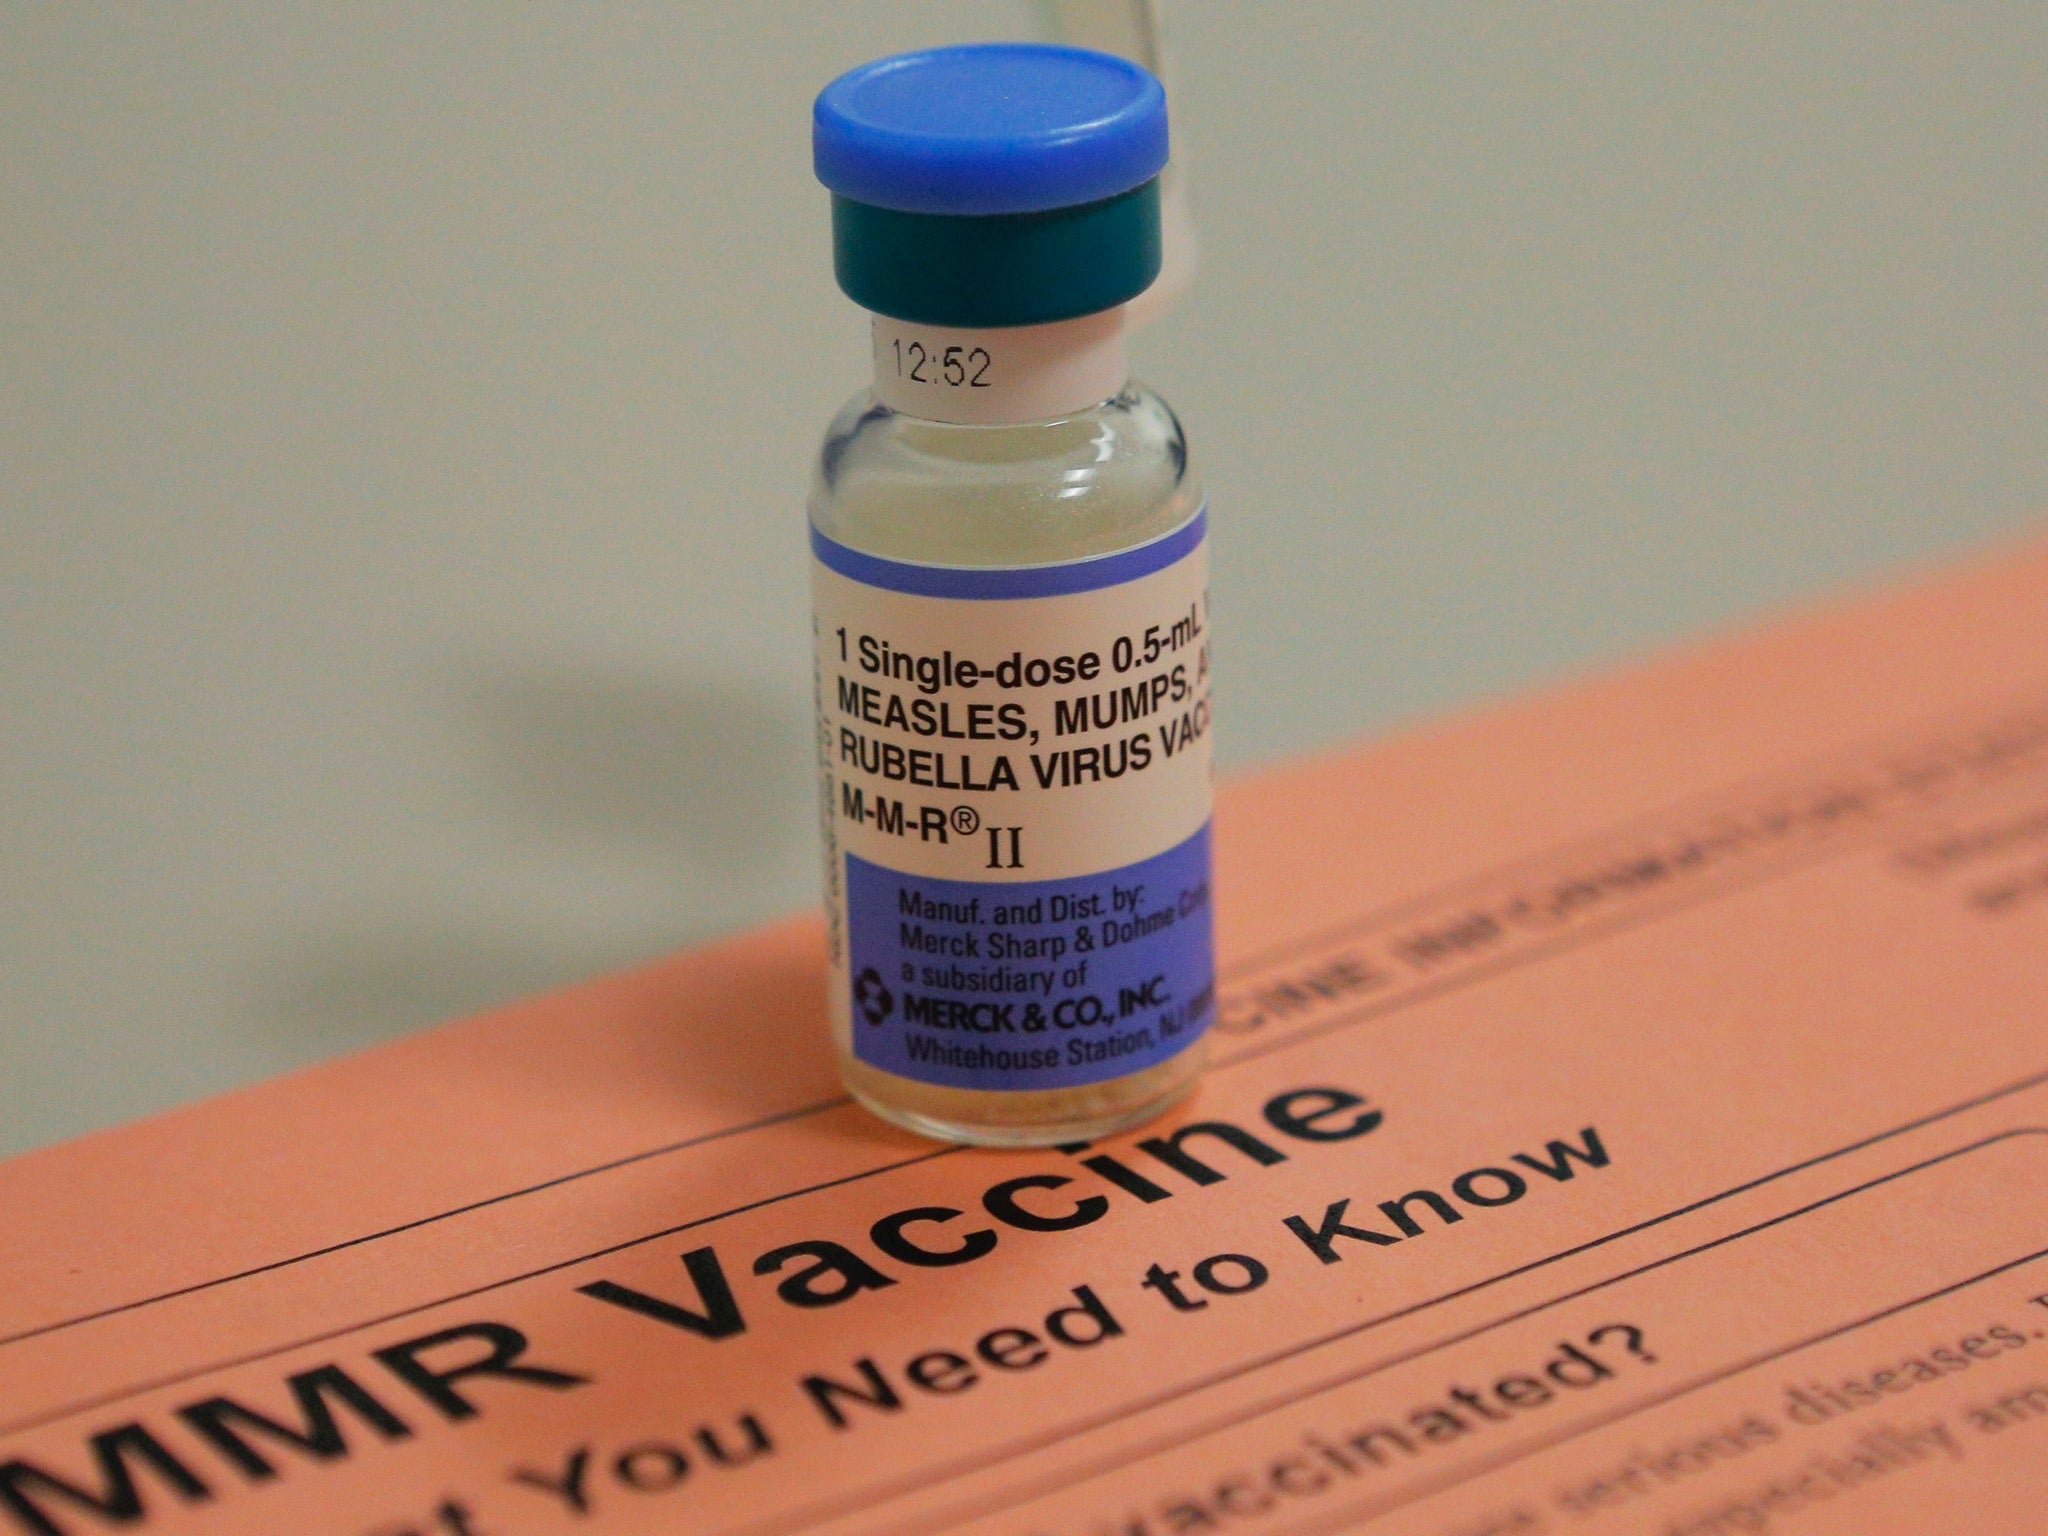 Fears about MMR jab link stoked by discredited UK physician led to a drop in vaccination rates